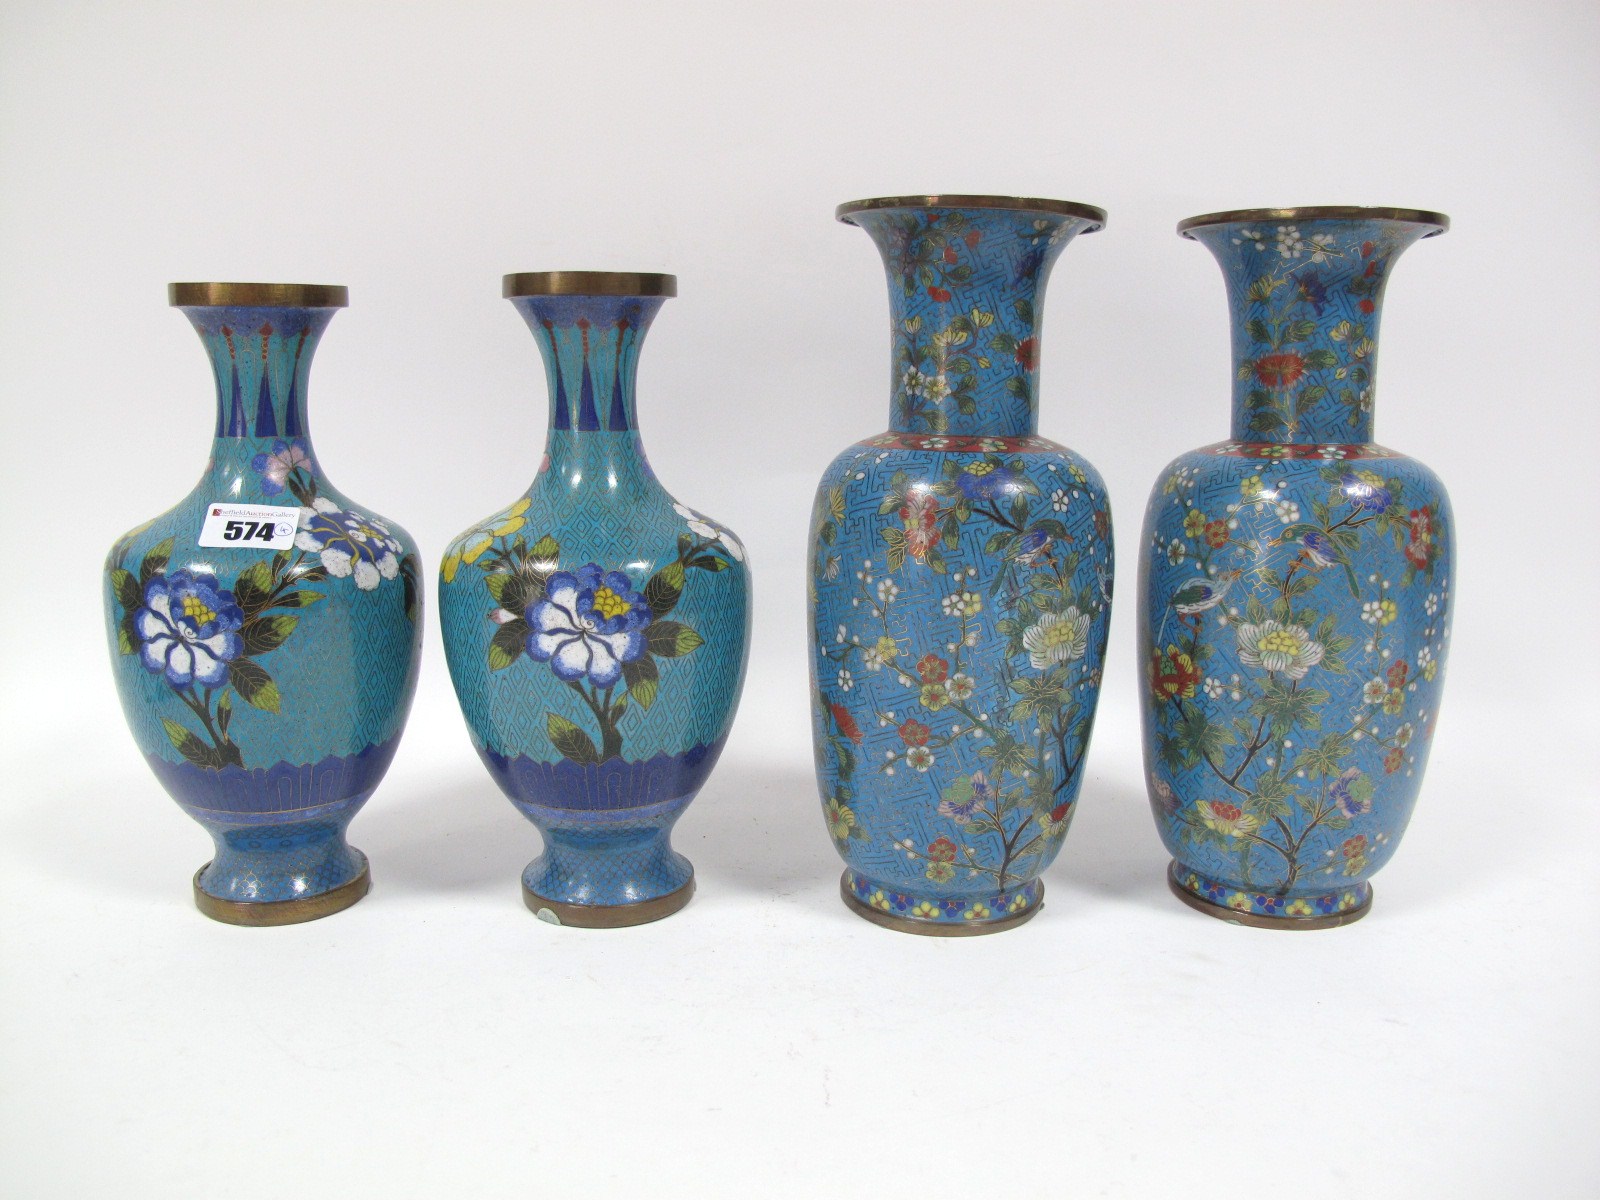 A Pair of XX Century Japanese Cloisonné Baluster Vases, decorated with birds on flowering